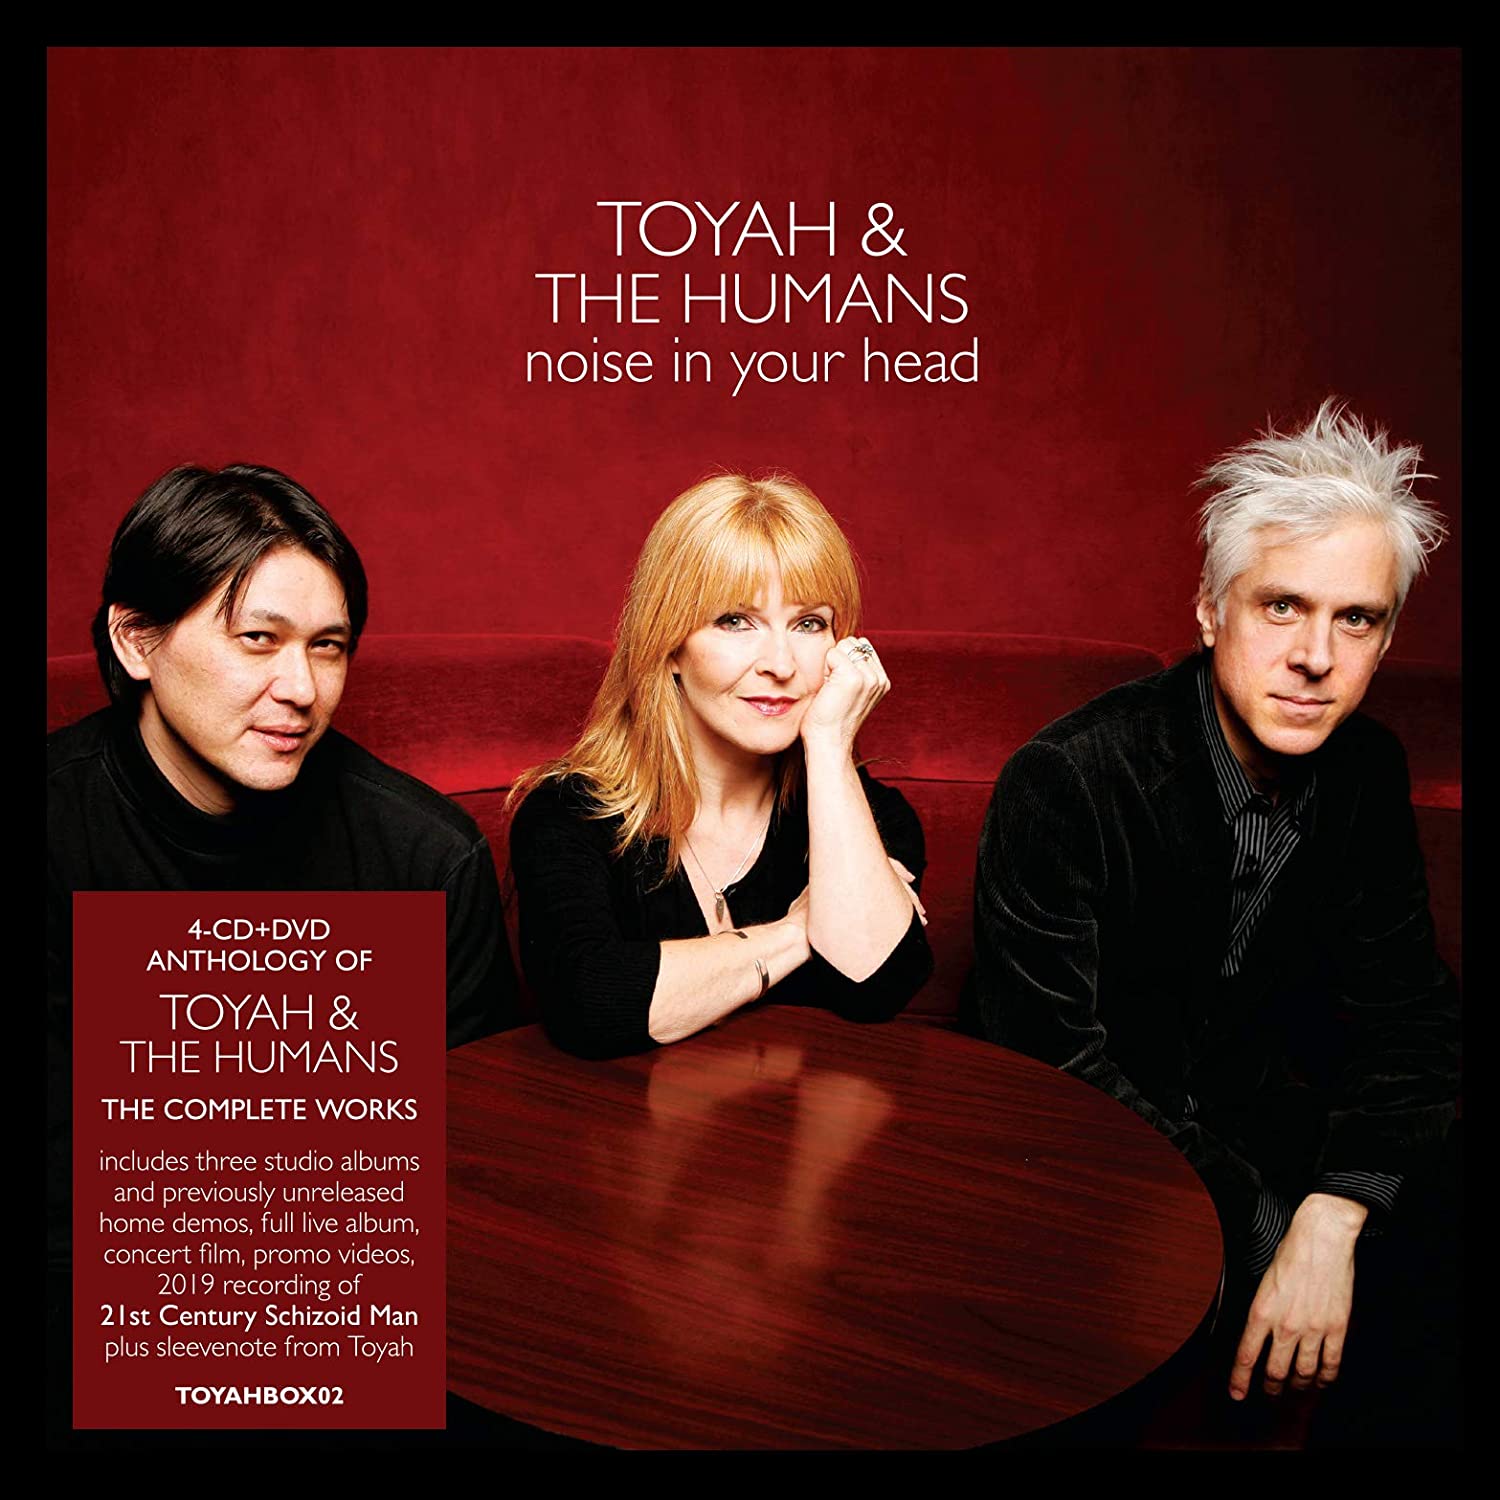 Toyah & The Humans / Noise in Your Head 4CD+DVD anthology signed